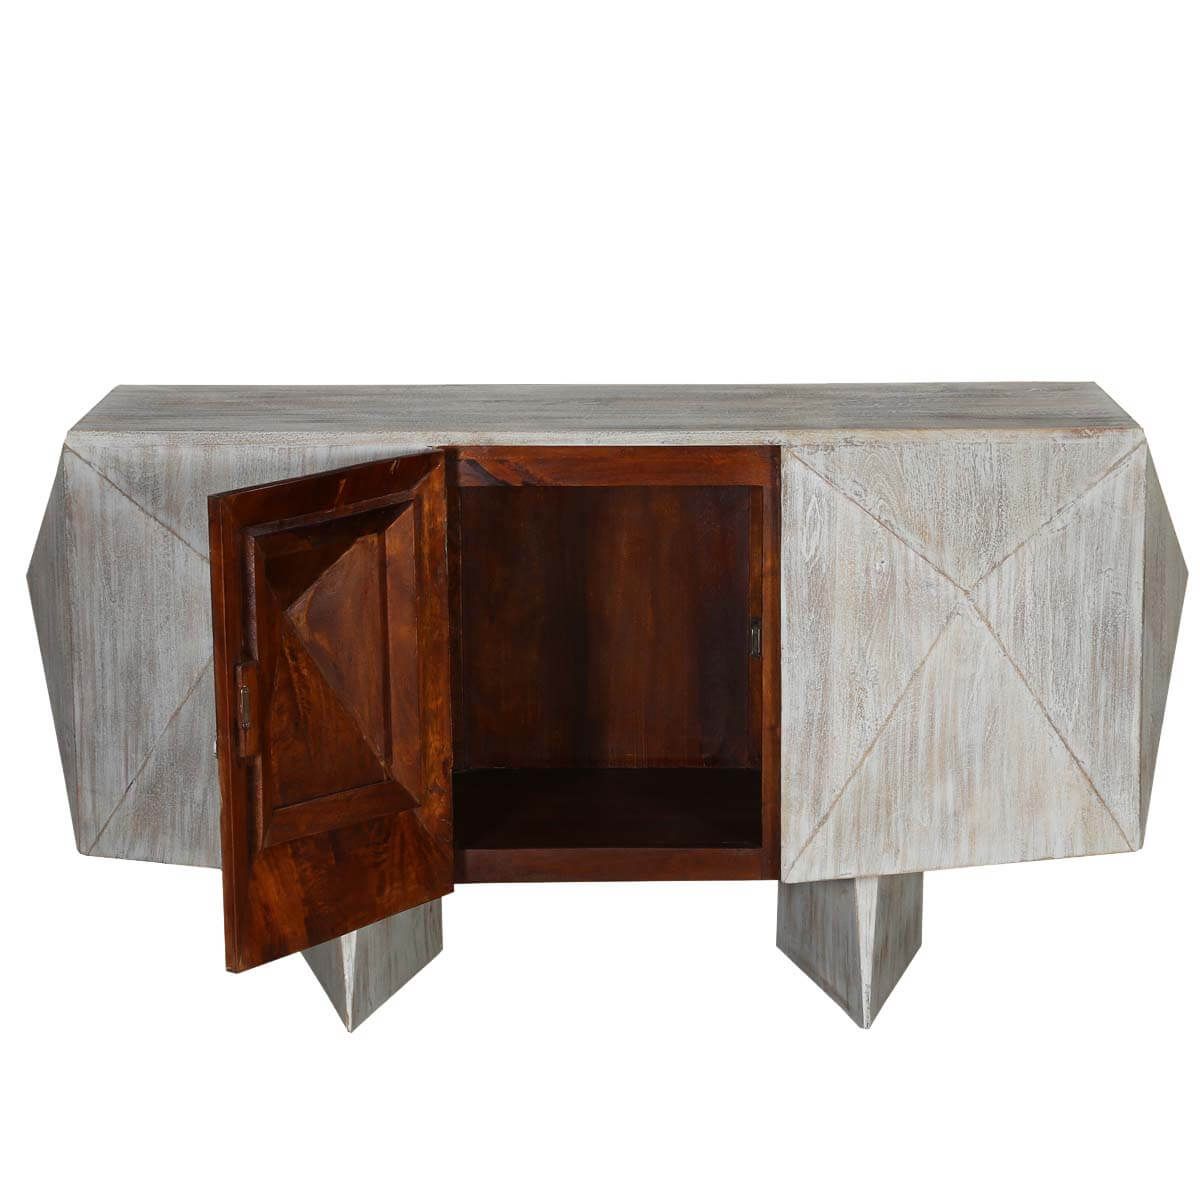 Modern Geometric Mango Wood Standing Tv Media Console Furniture Throughout White Geometric Console Tables (Gallery 19 of 20)